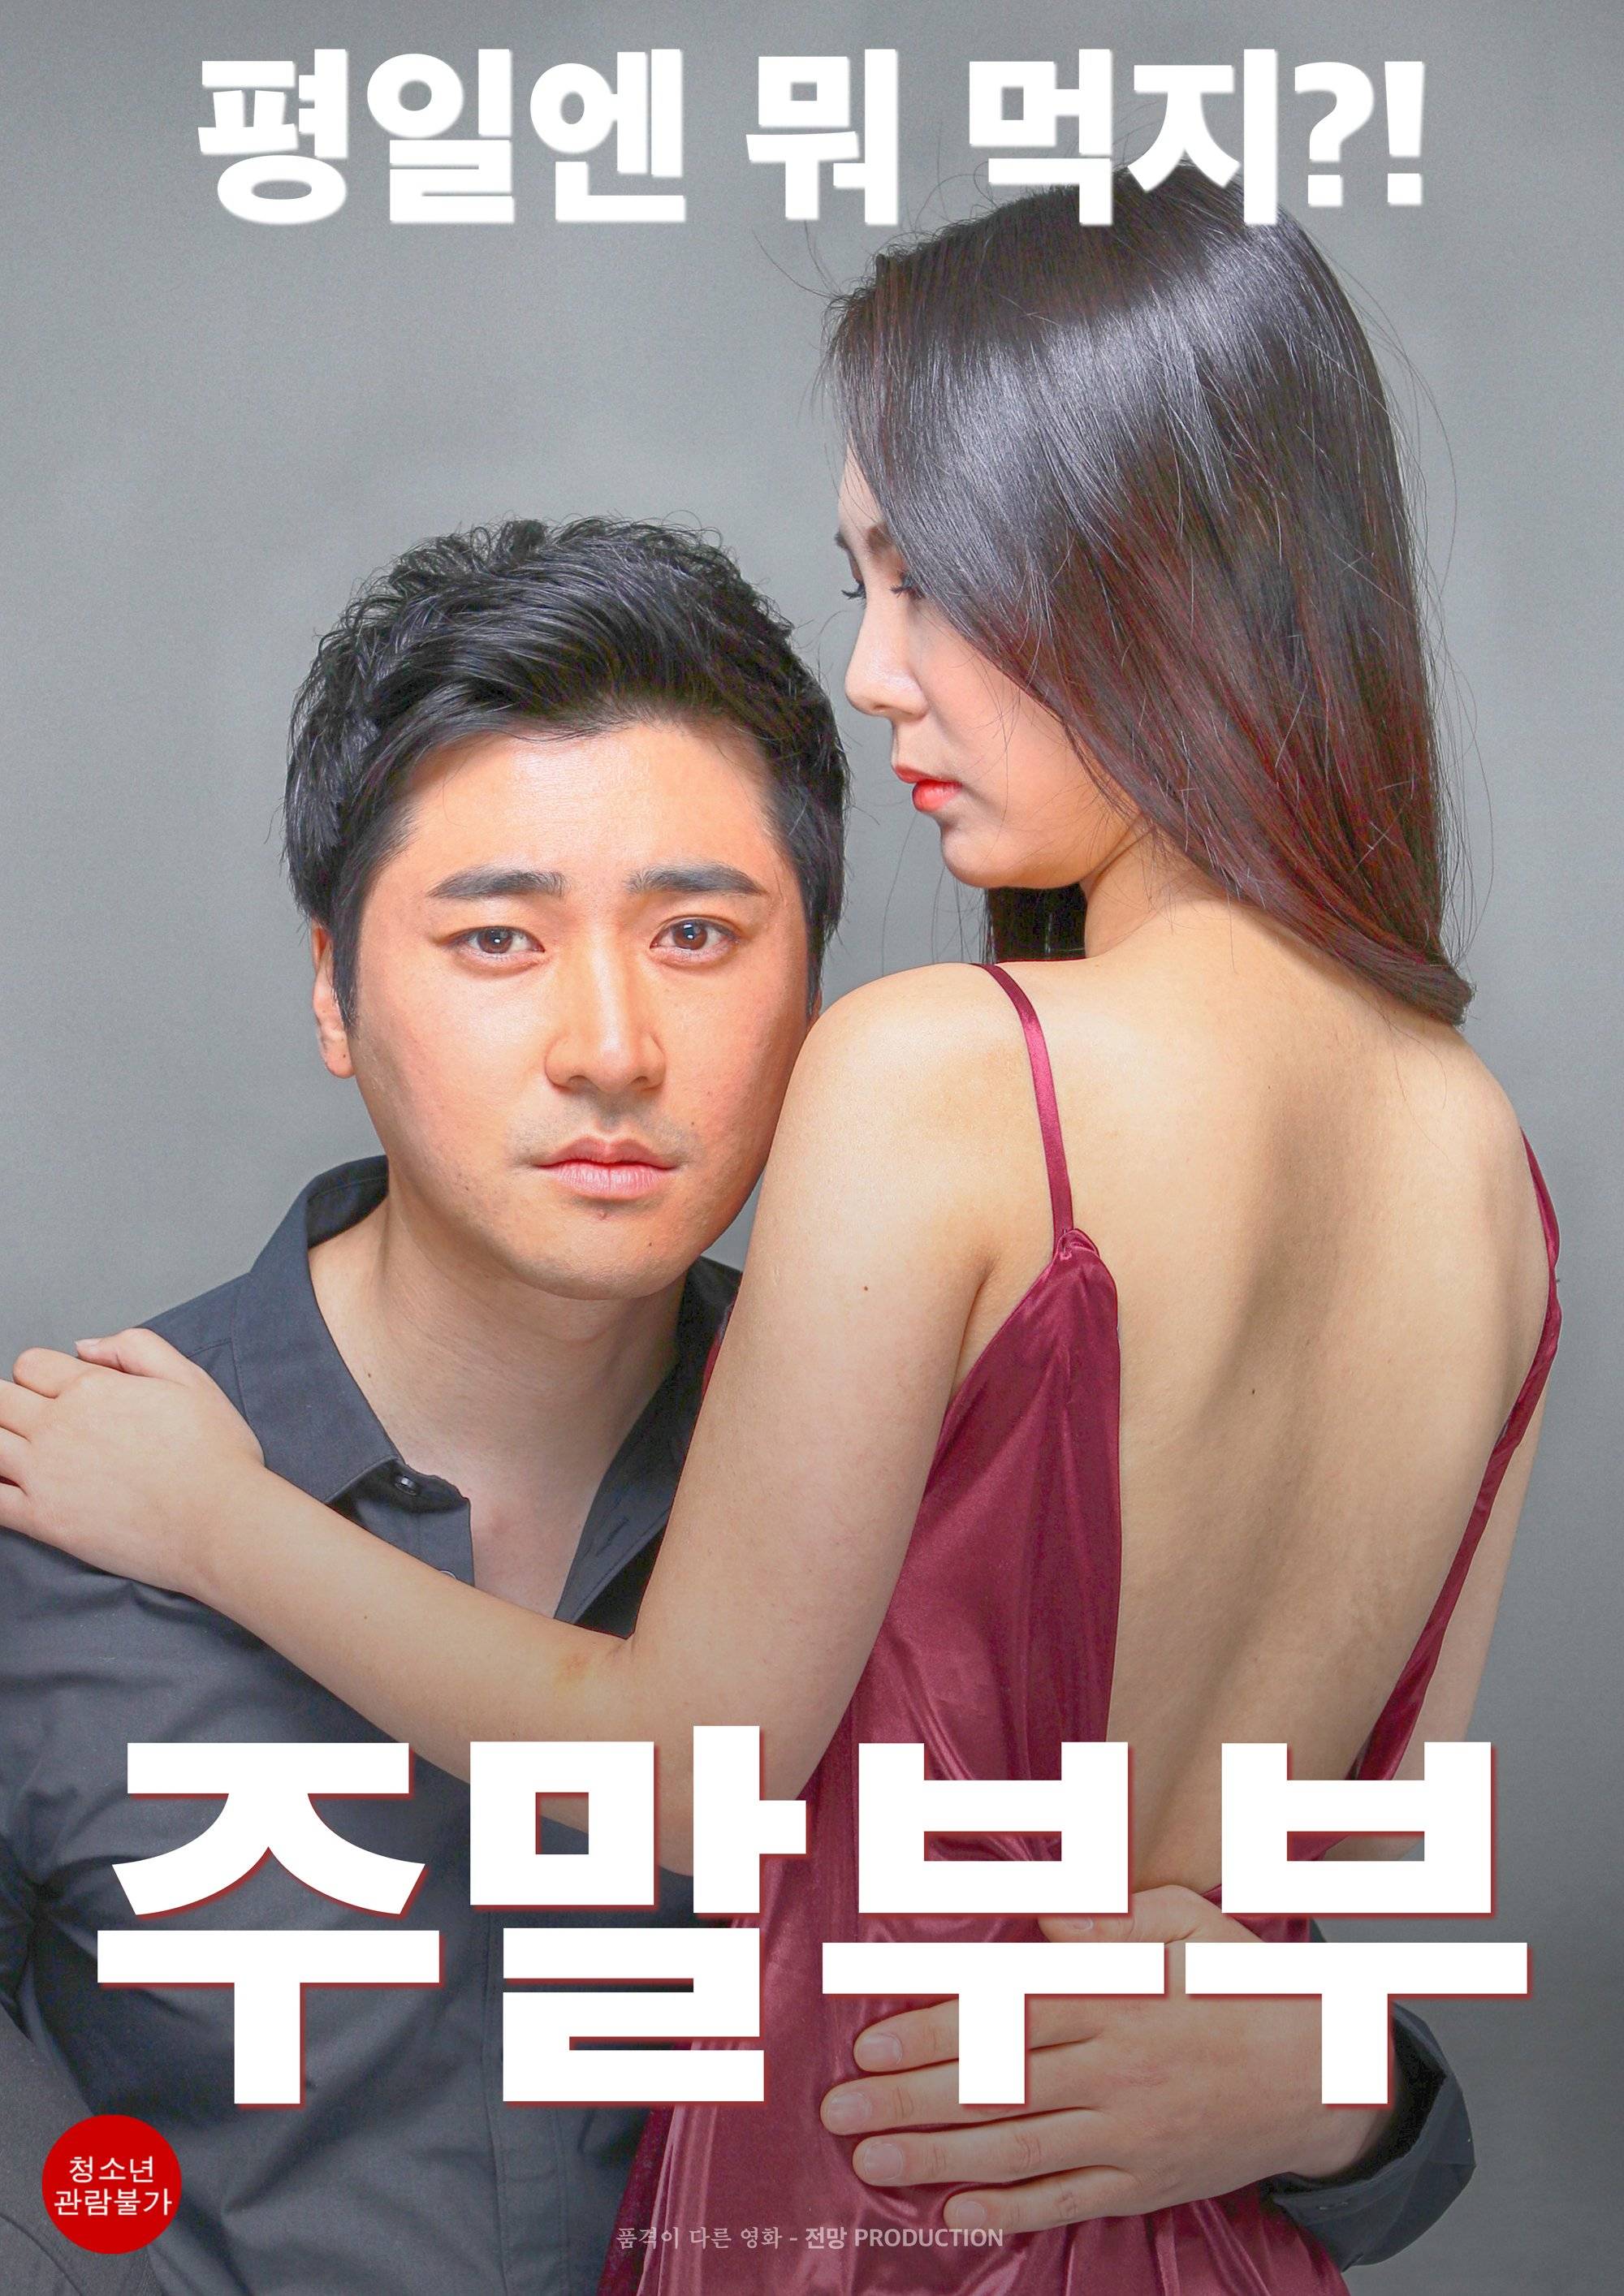 Video Adult Rated Trailer Released For The Korean Movie Weekend Couple HanCinema